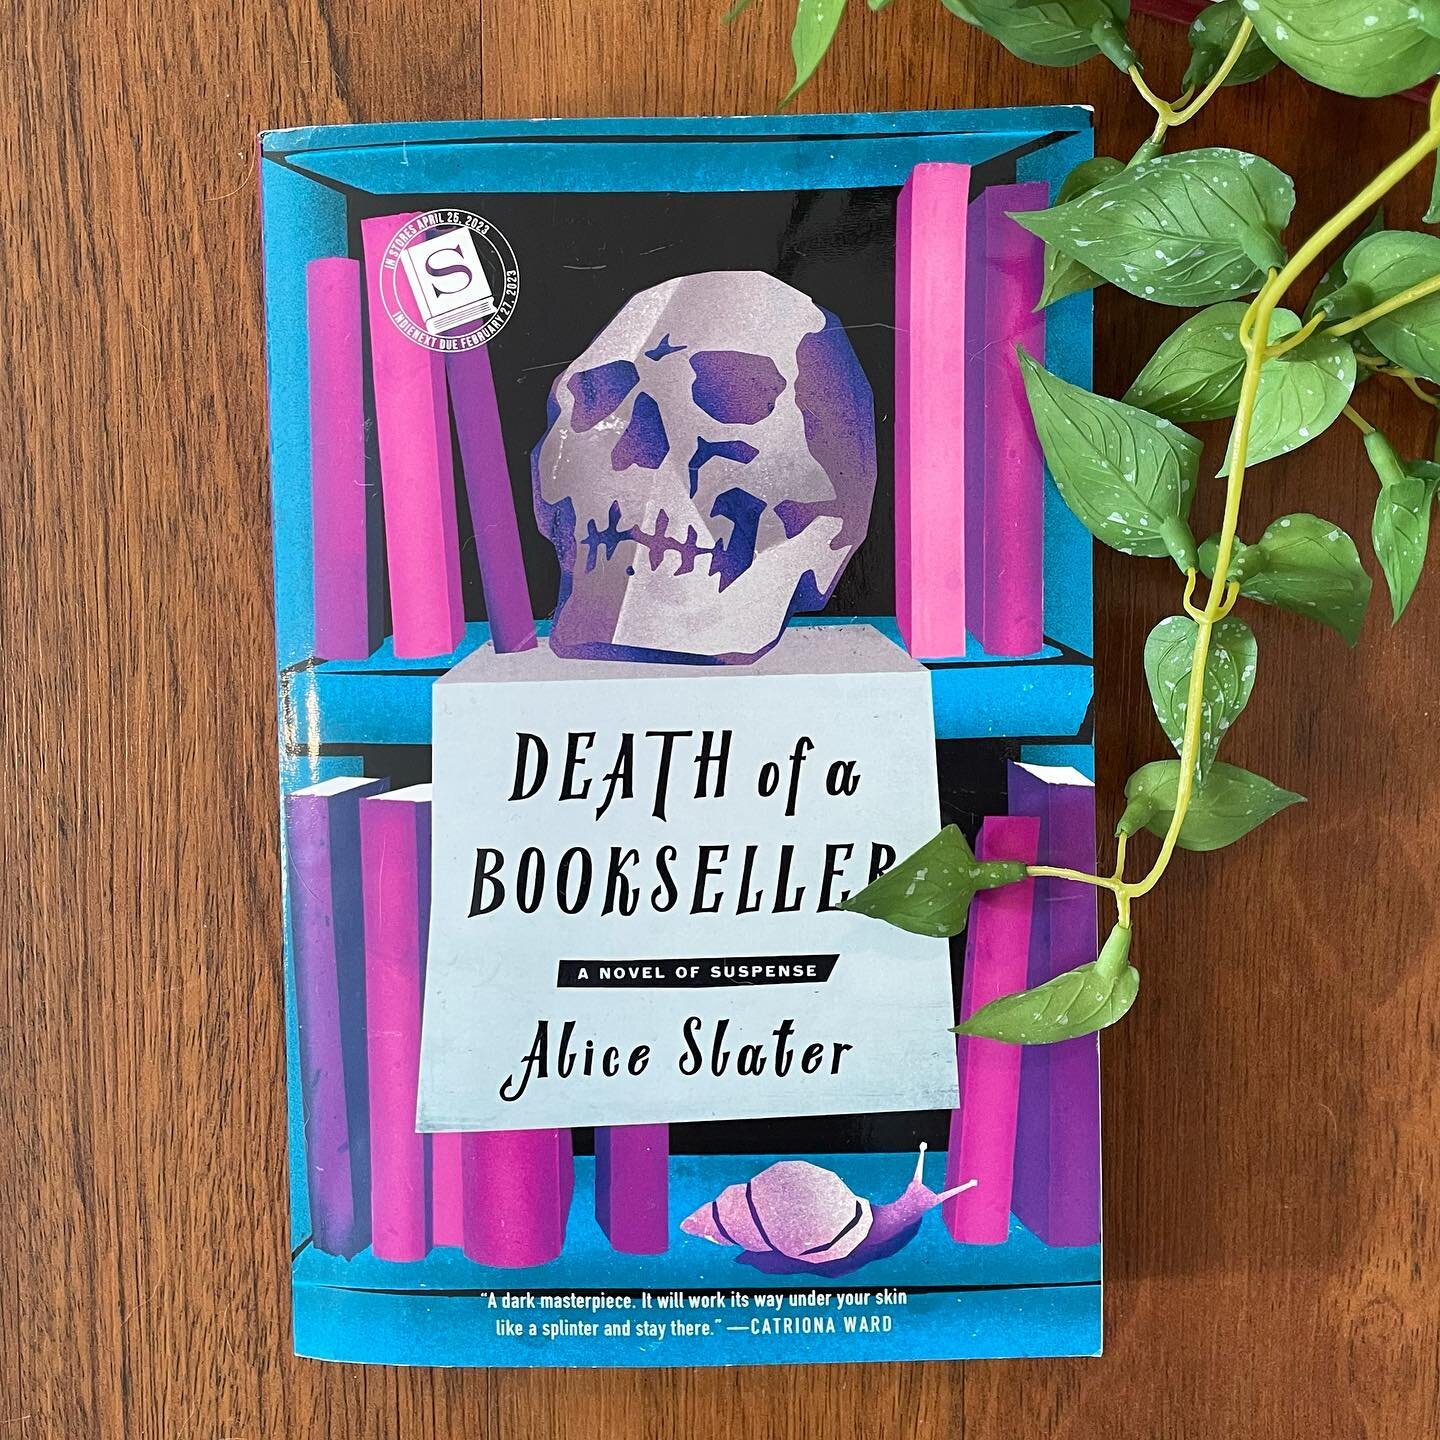 HAPPY PUB DAY! 

📖 DEATH OF A BOOKSELLER by Alice Slater 

🕵🏻 Roach would rather be listening to the latest episode of her favorite true crime podcast than assisting the boring and predictable customers at her local branch of the bookstore Spines,